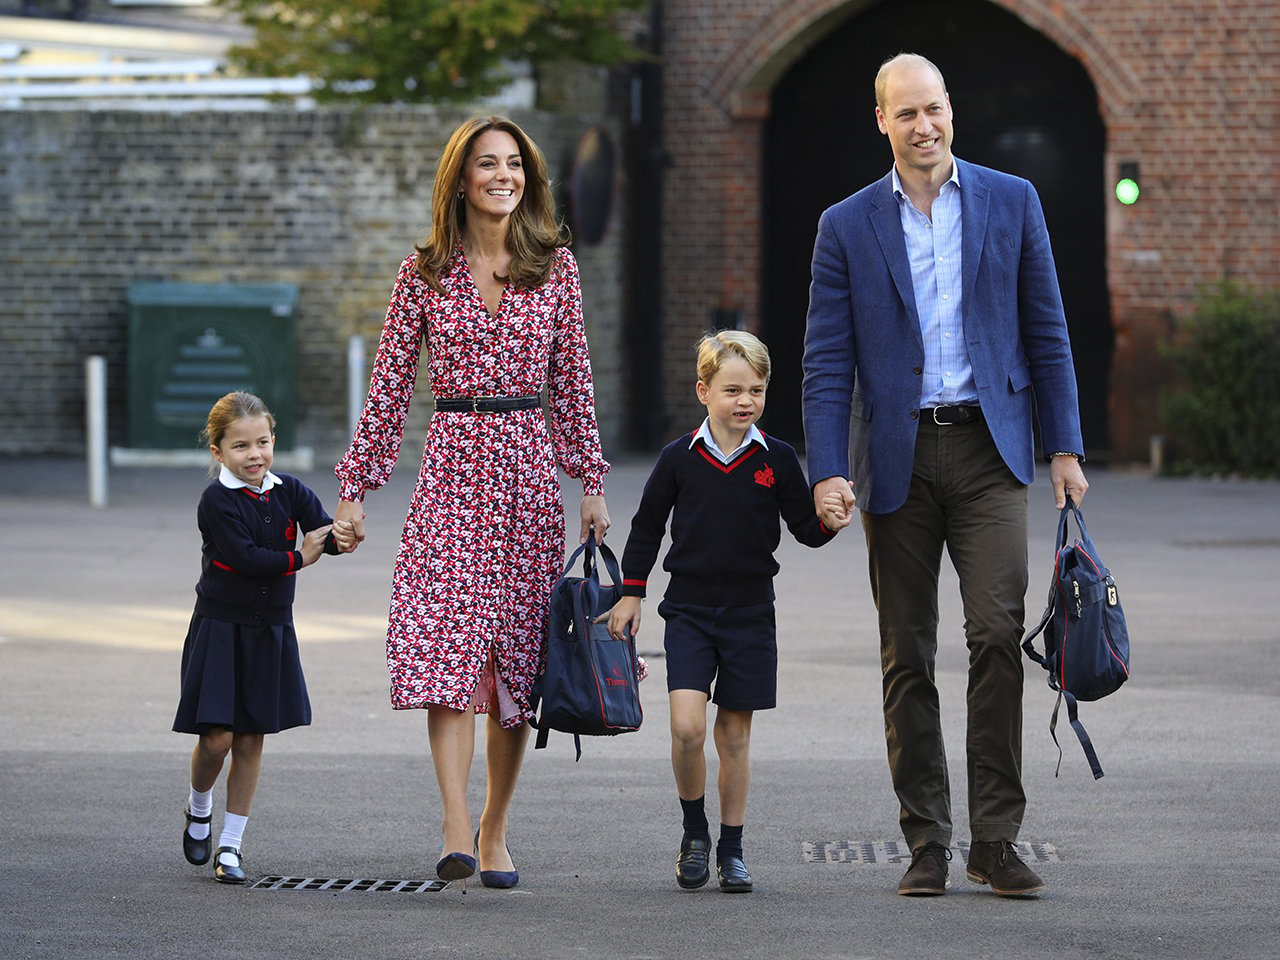 The Cambridge family arriving at Thomas's Battersea on charlotte's first day of school